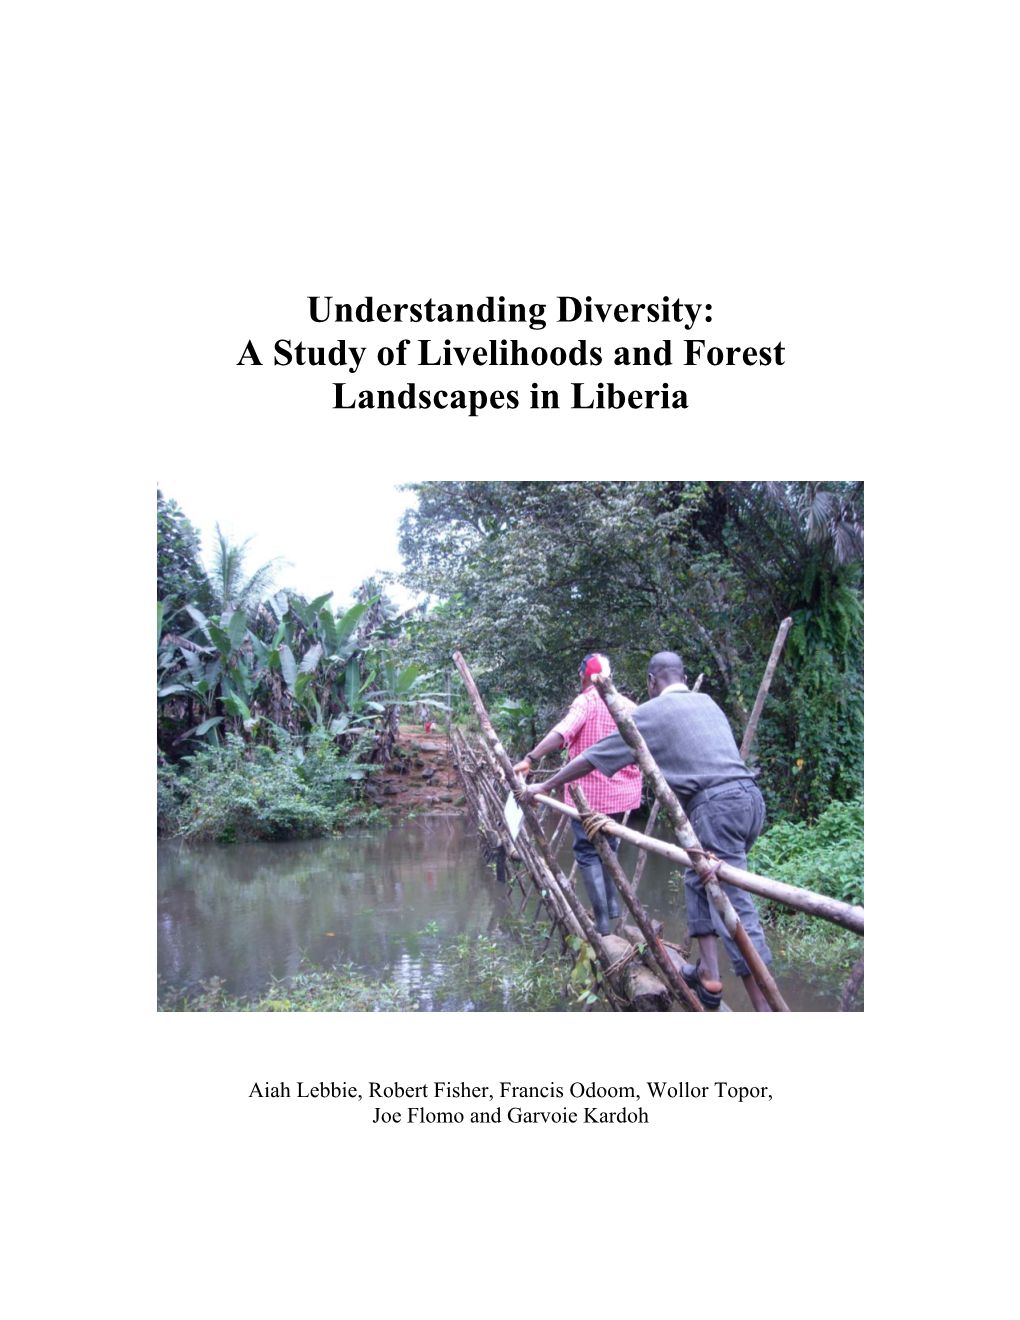 Understanding Diversity: a Study of Livelihoods and Forest Landscapes in Liberia